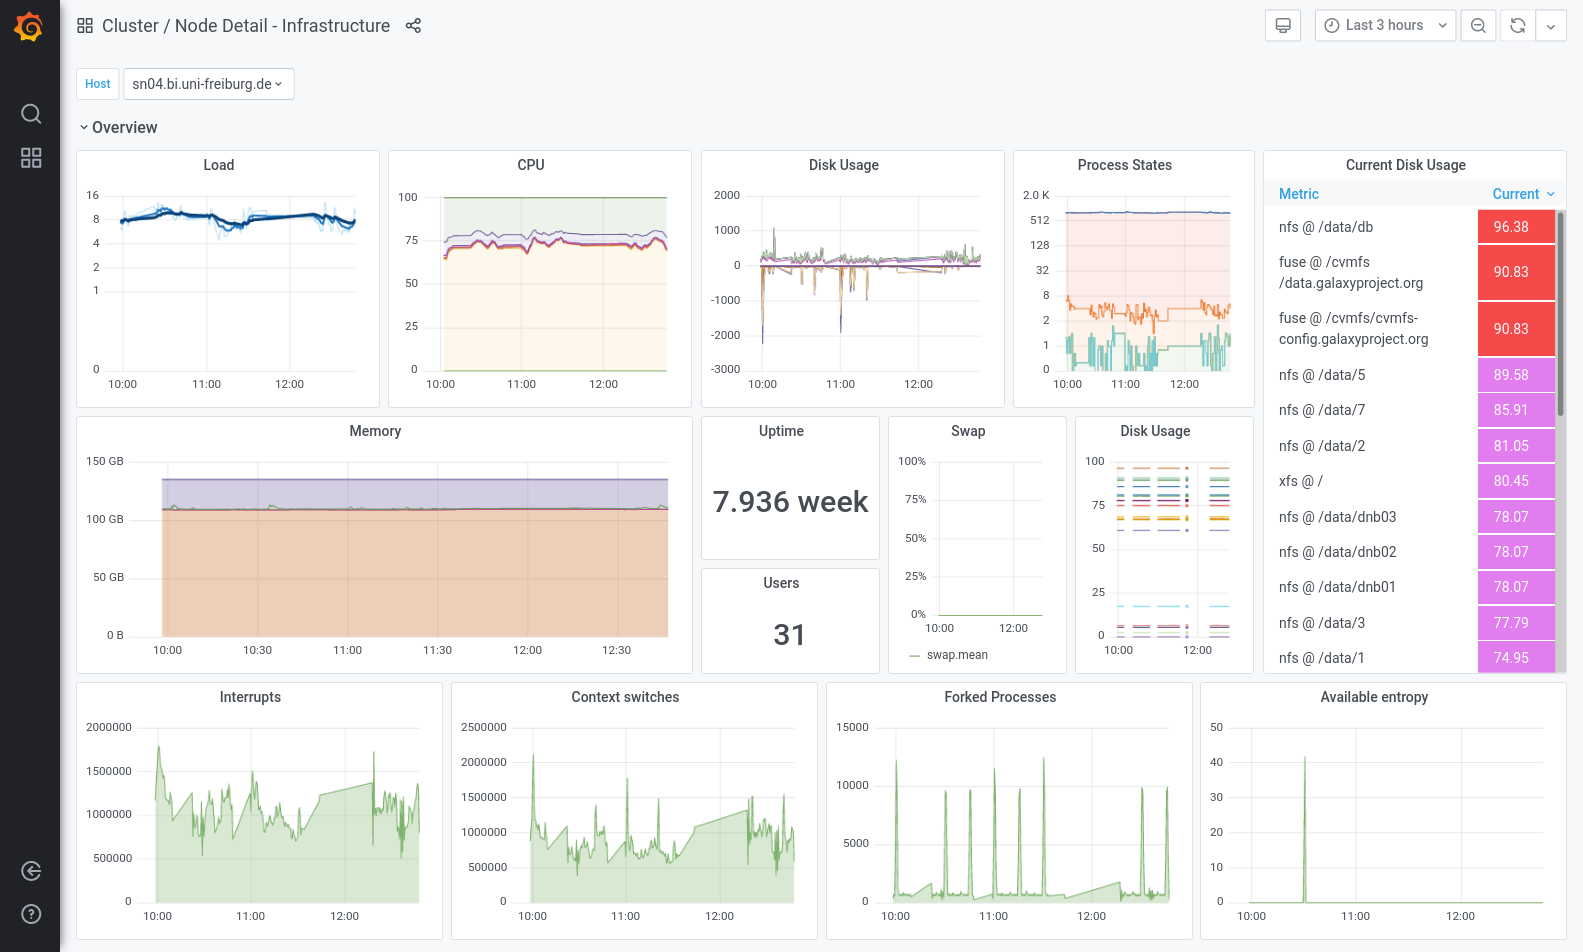 node detail dashboard with filesystem usage, process states, cpu, memory, load, network, etc.